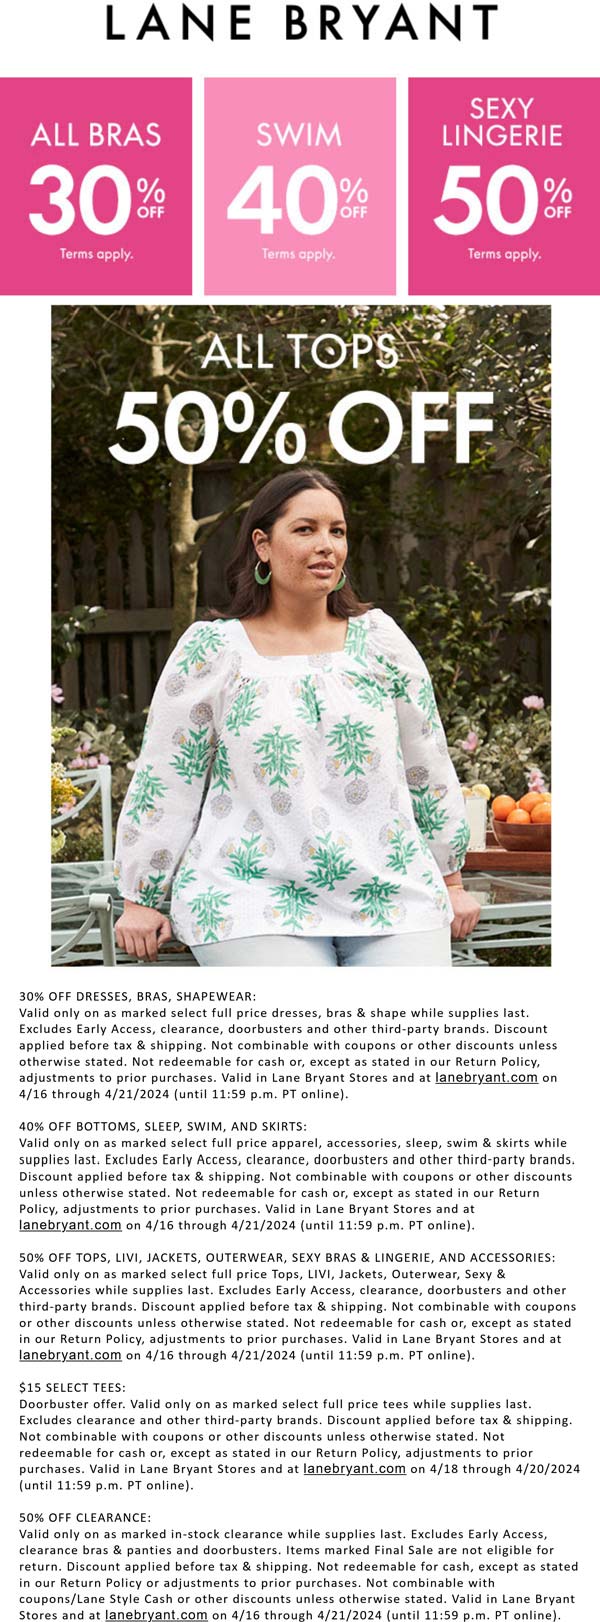 Lane Bryant stores Coupon  50% off all tops & more at Lane Bryant, ditto online #lanebryant 